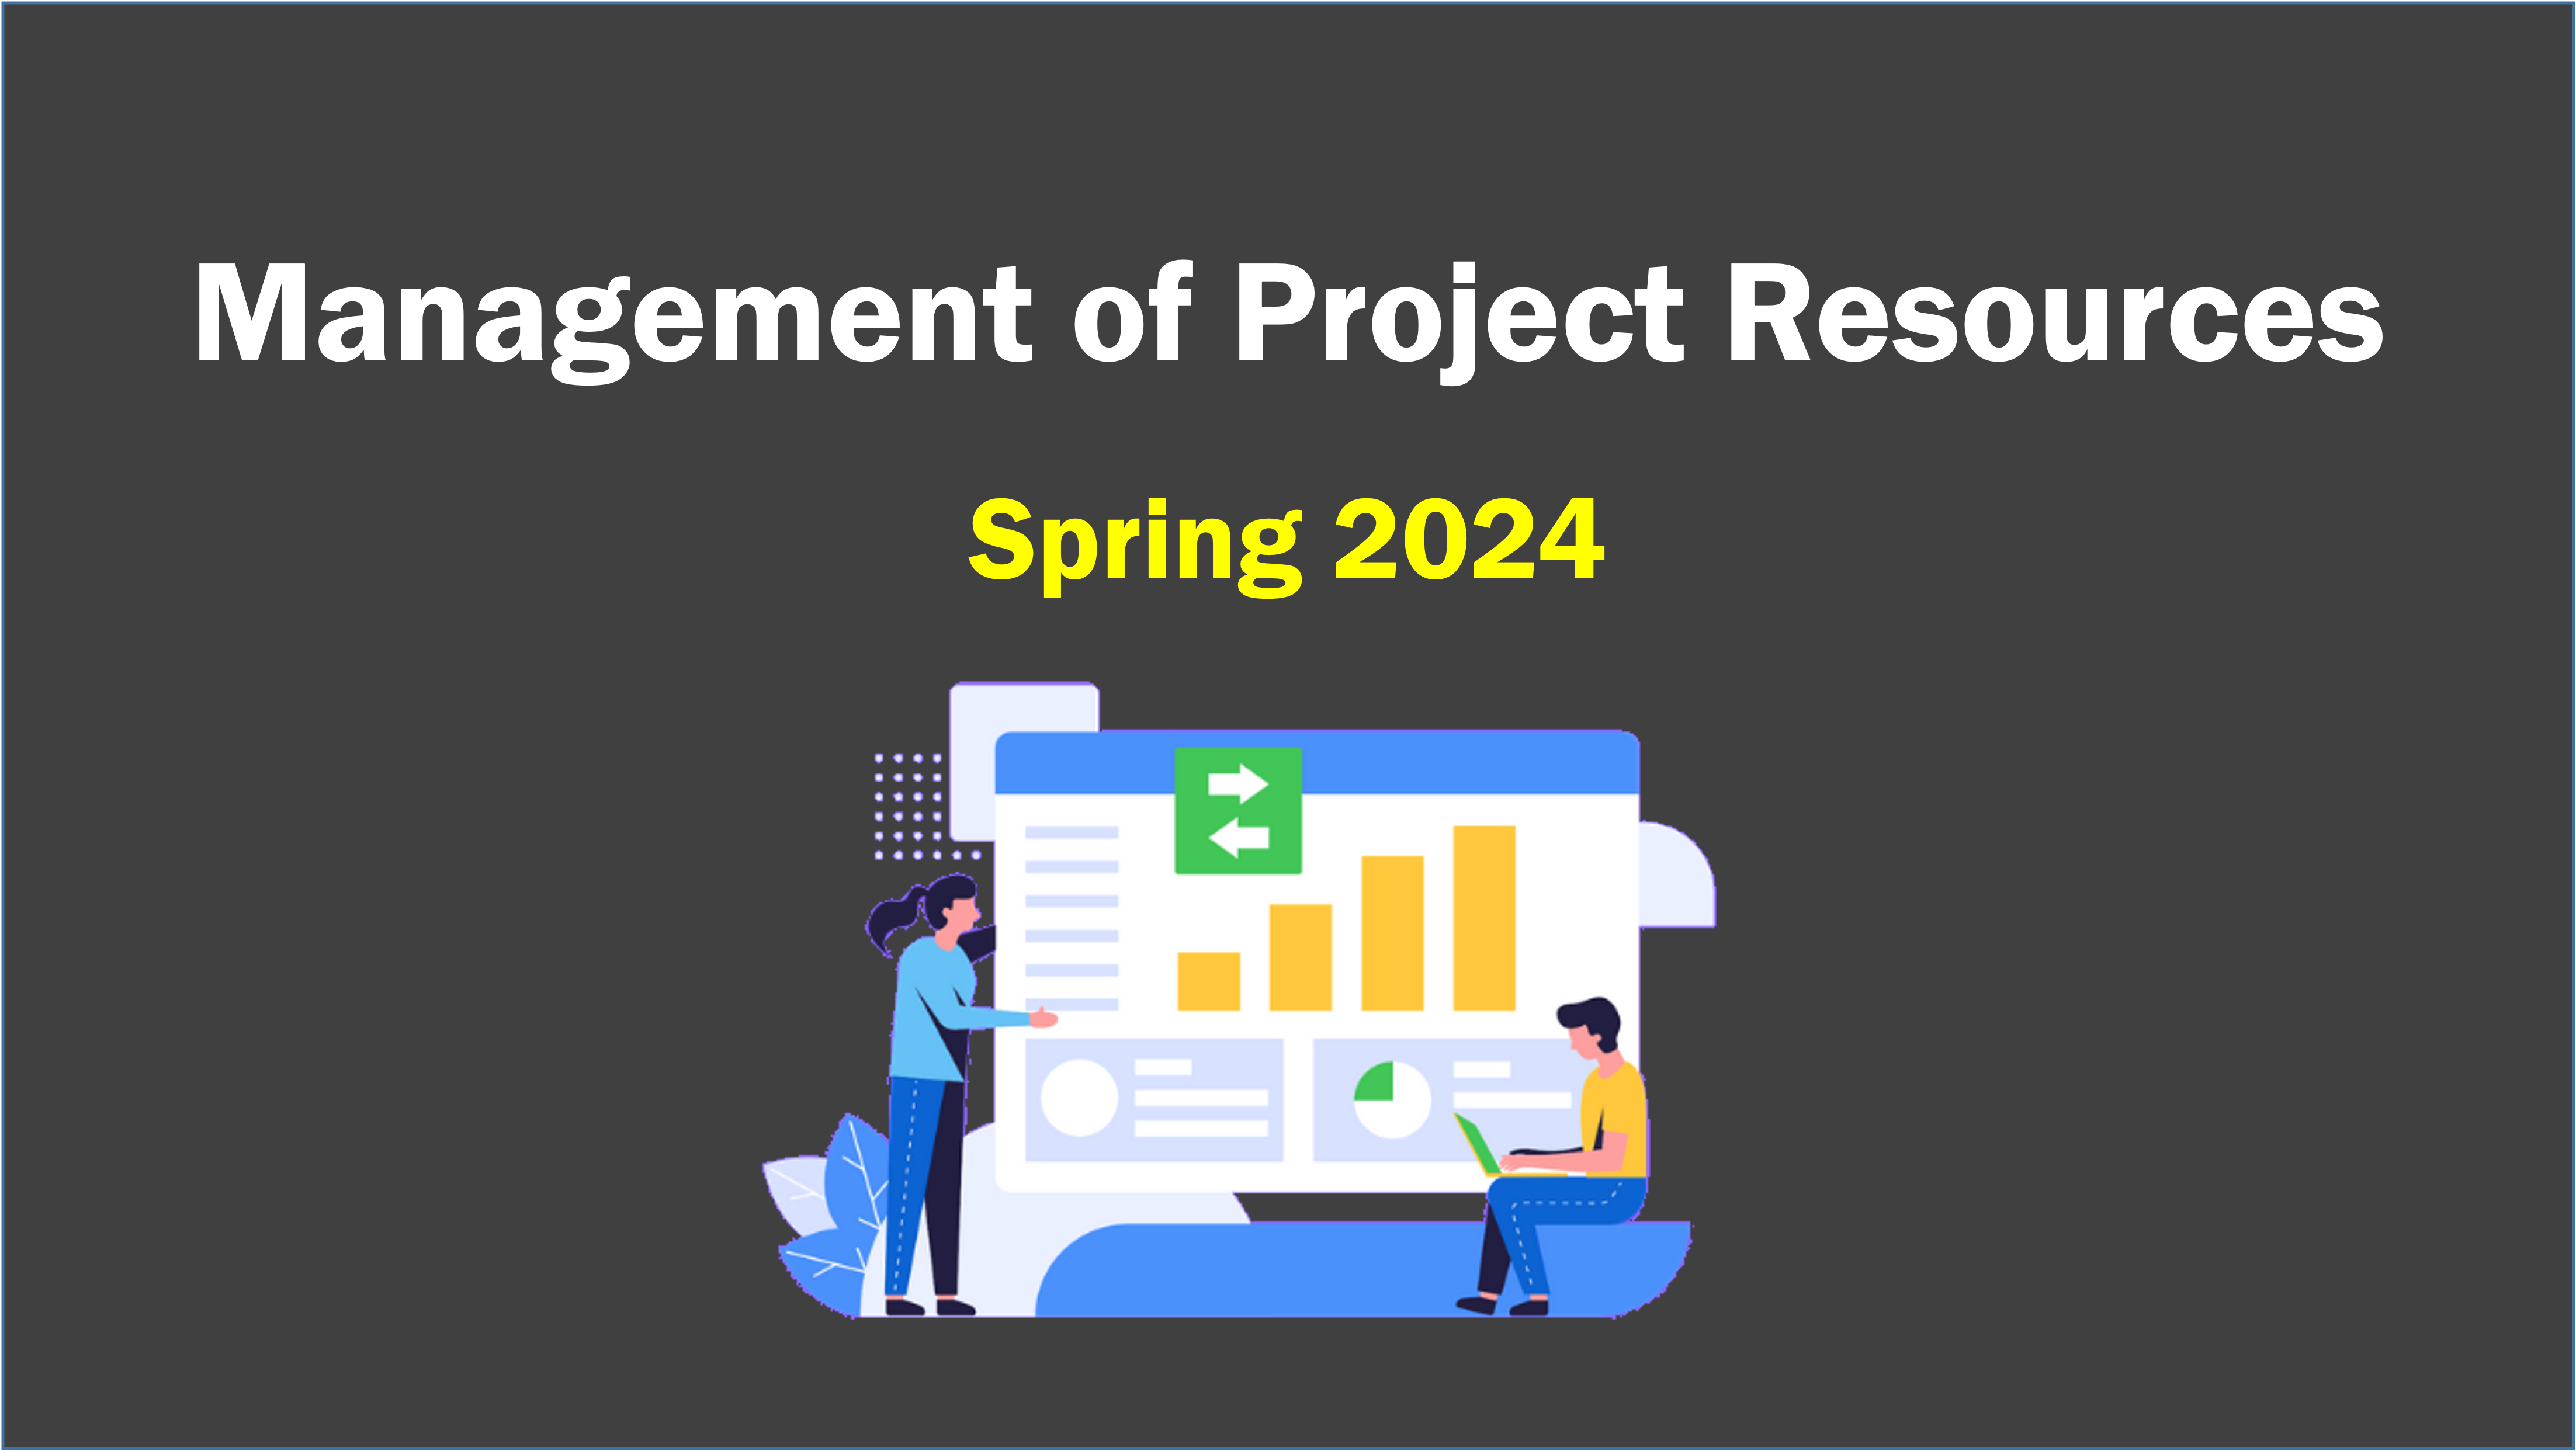 PRMG 02: Management of Project Resources - Spring 2024